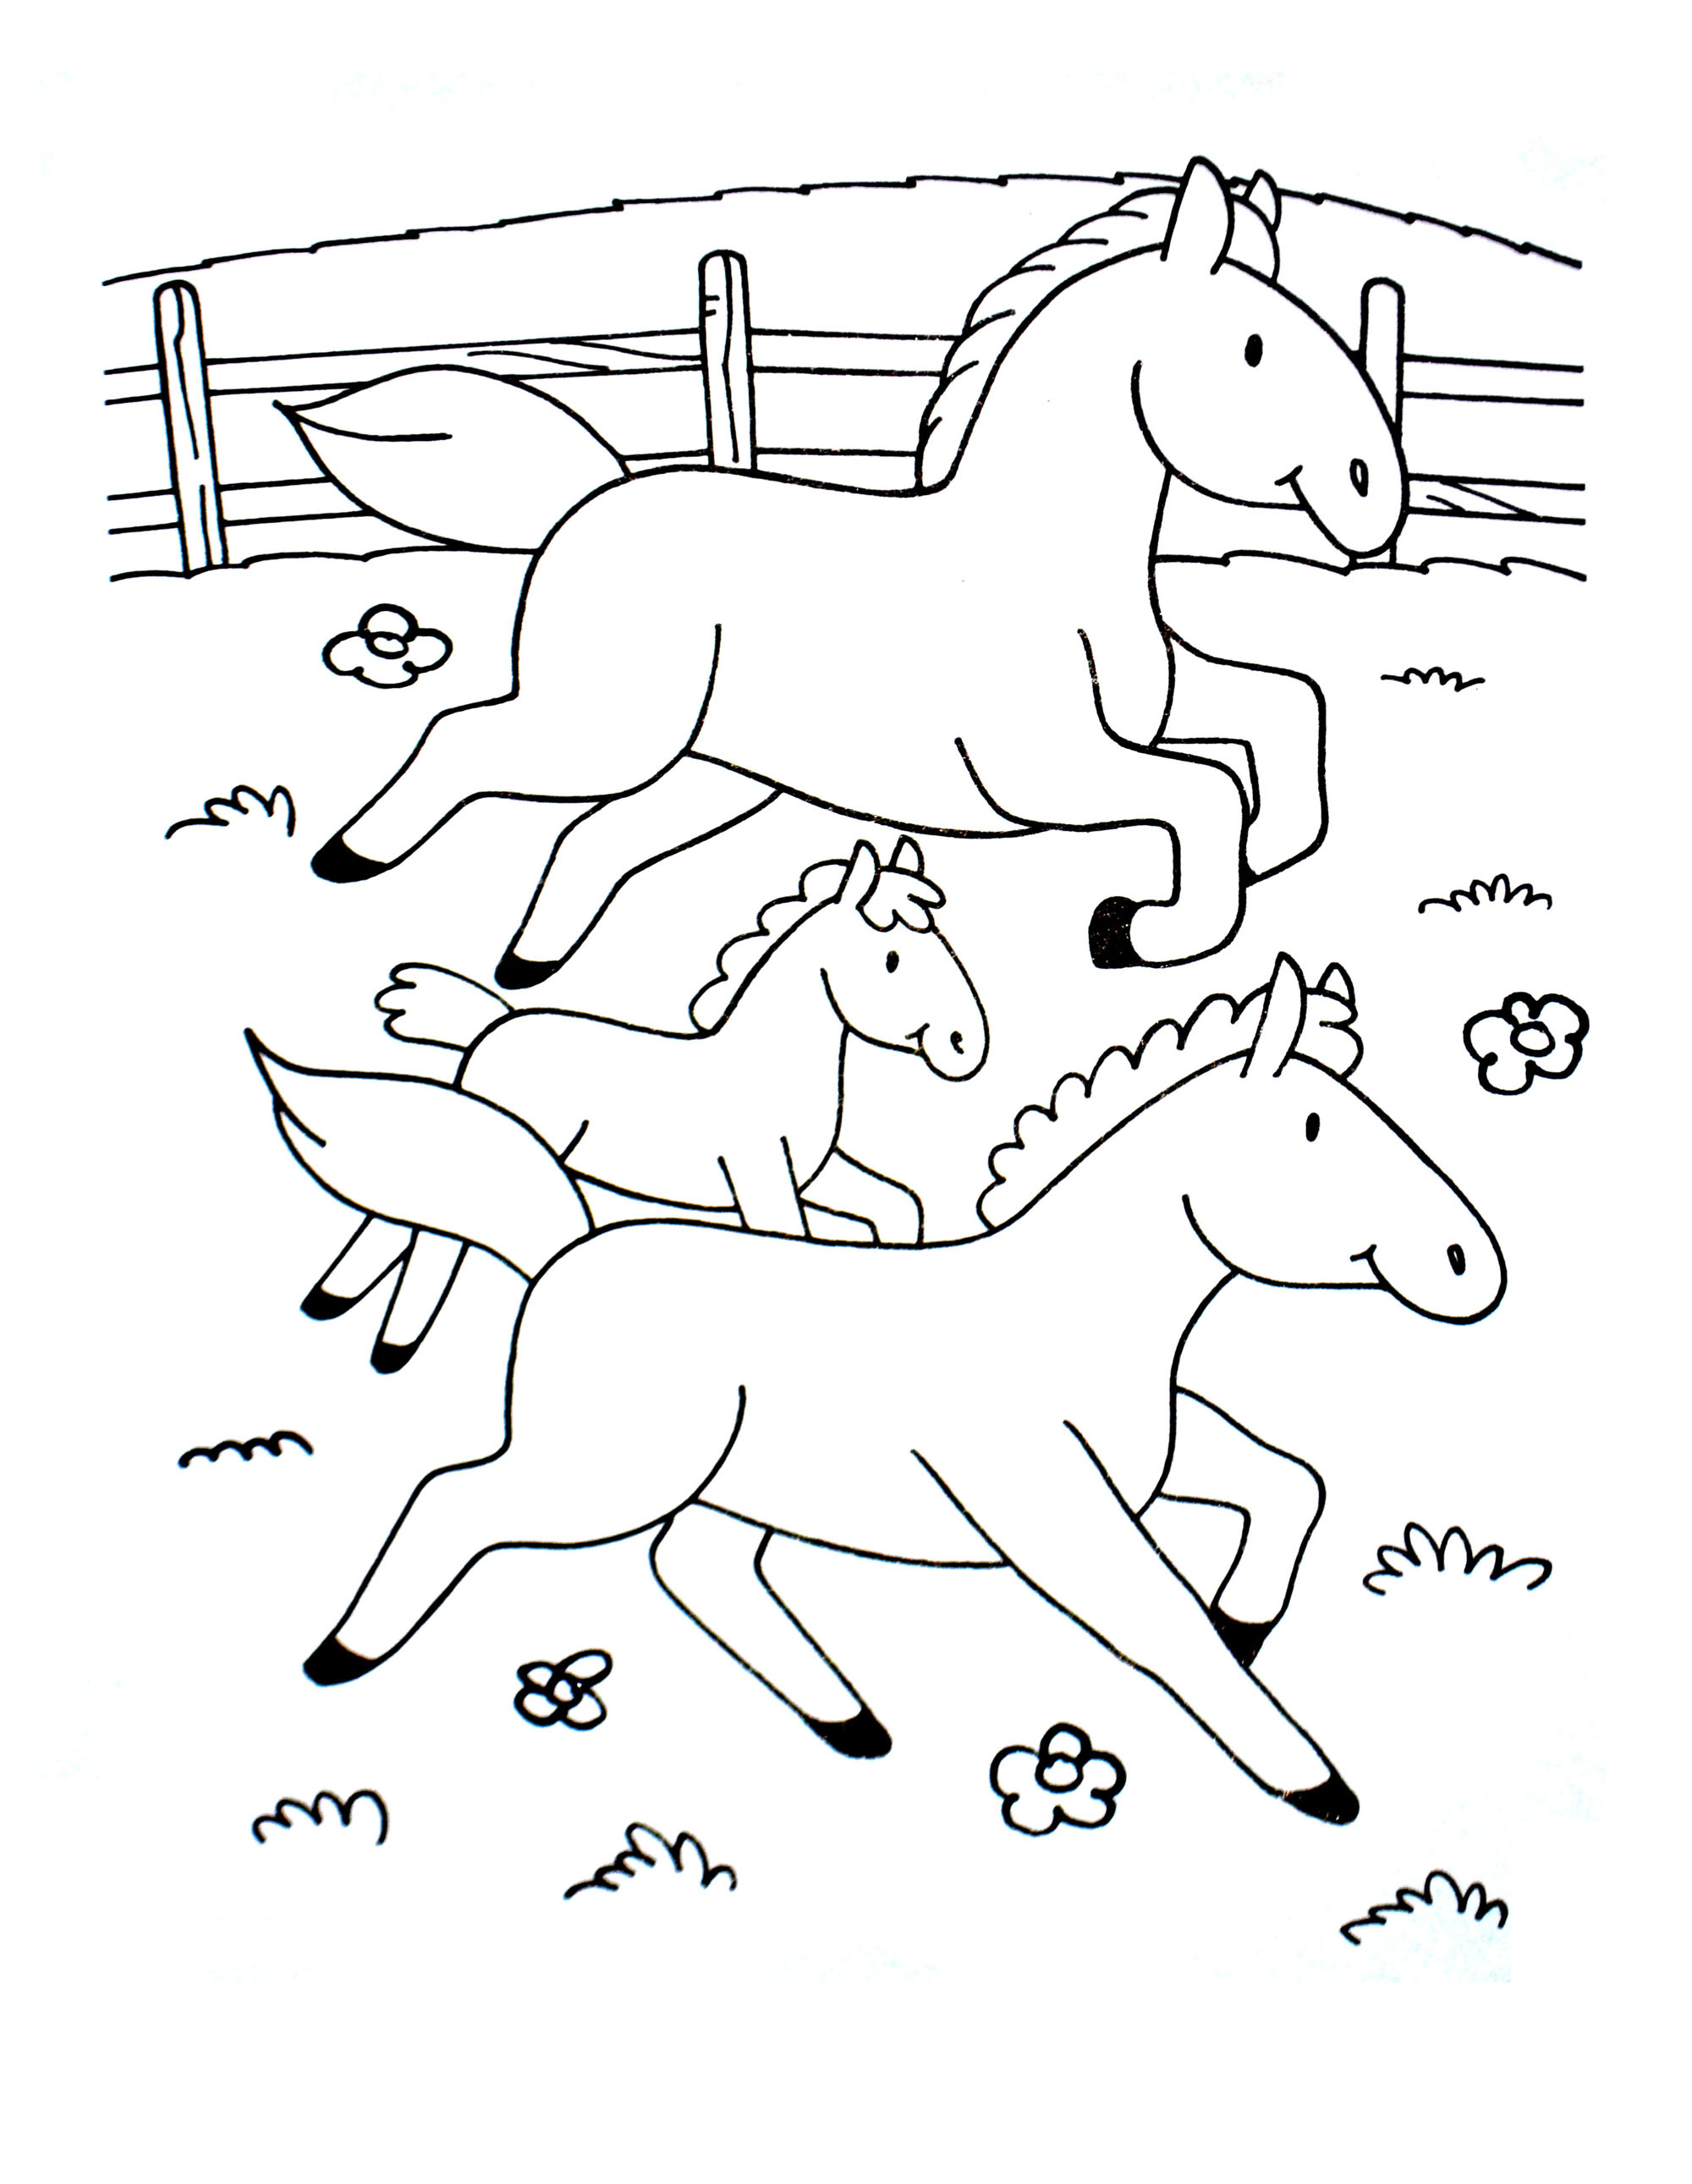 Coloring Horses For Kids To Print Horses Kids Coloring Pages